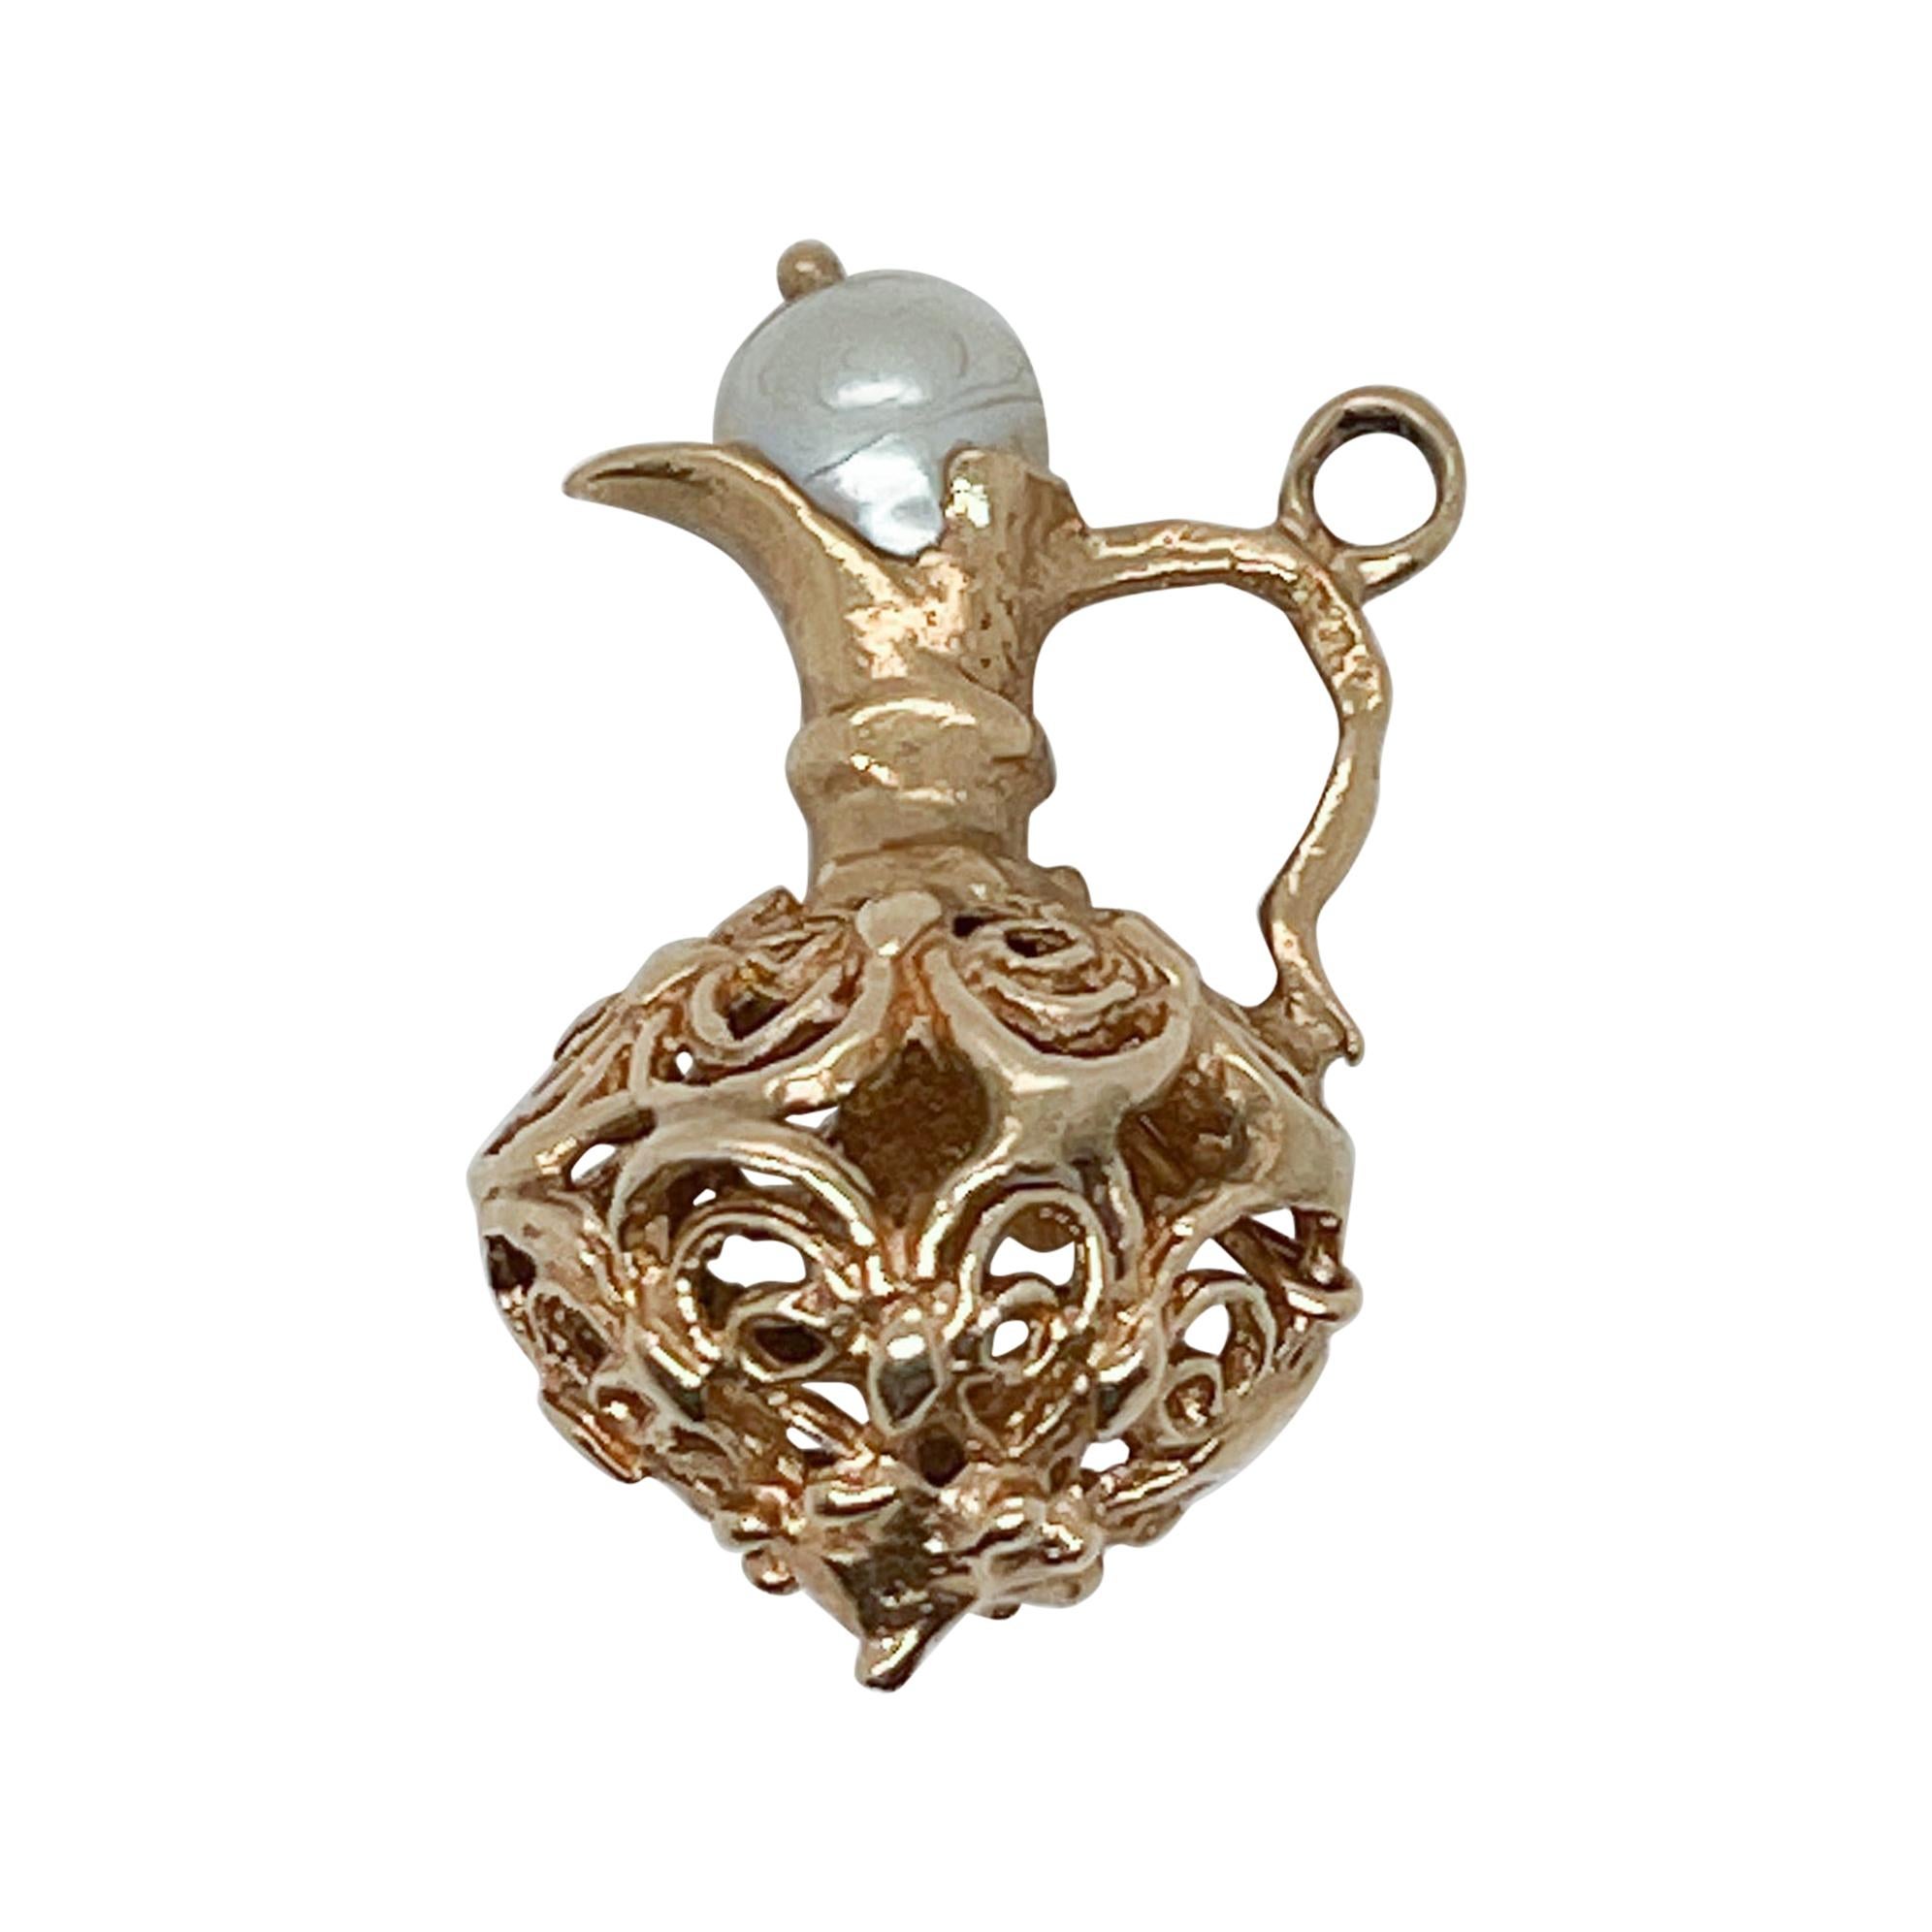 Vintage 14k Gold Pitcher or Wine Ewer with a Pearl Lid Charm for a Bracelet For Sale